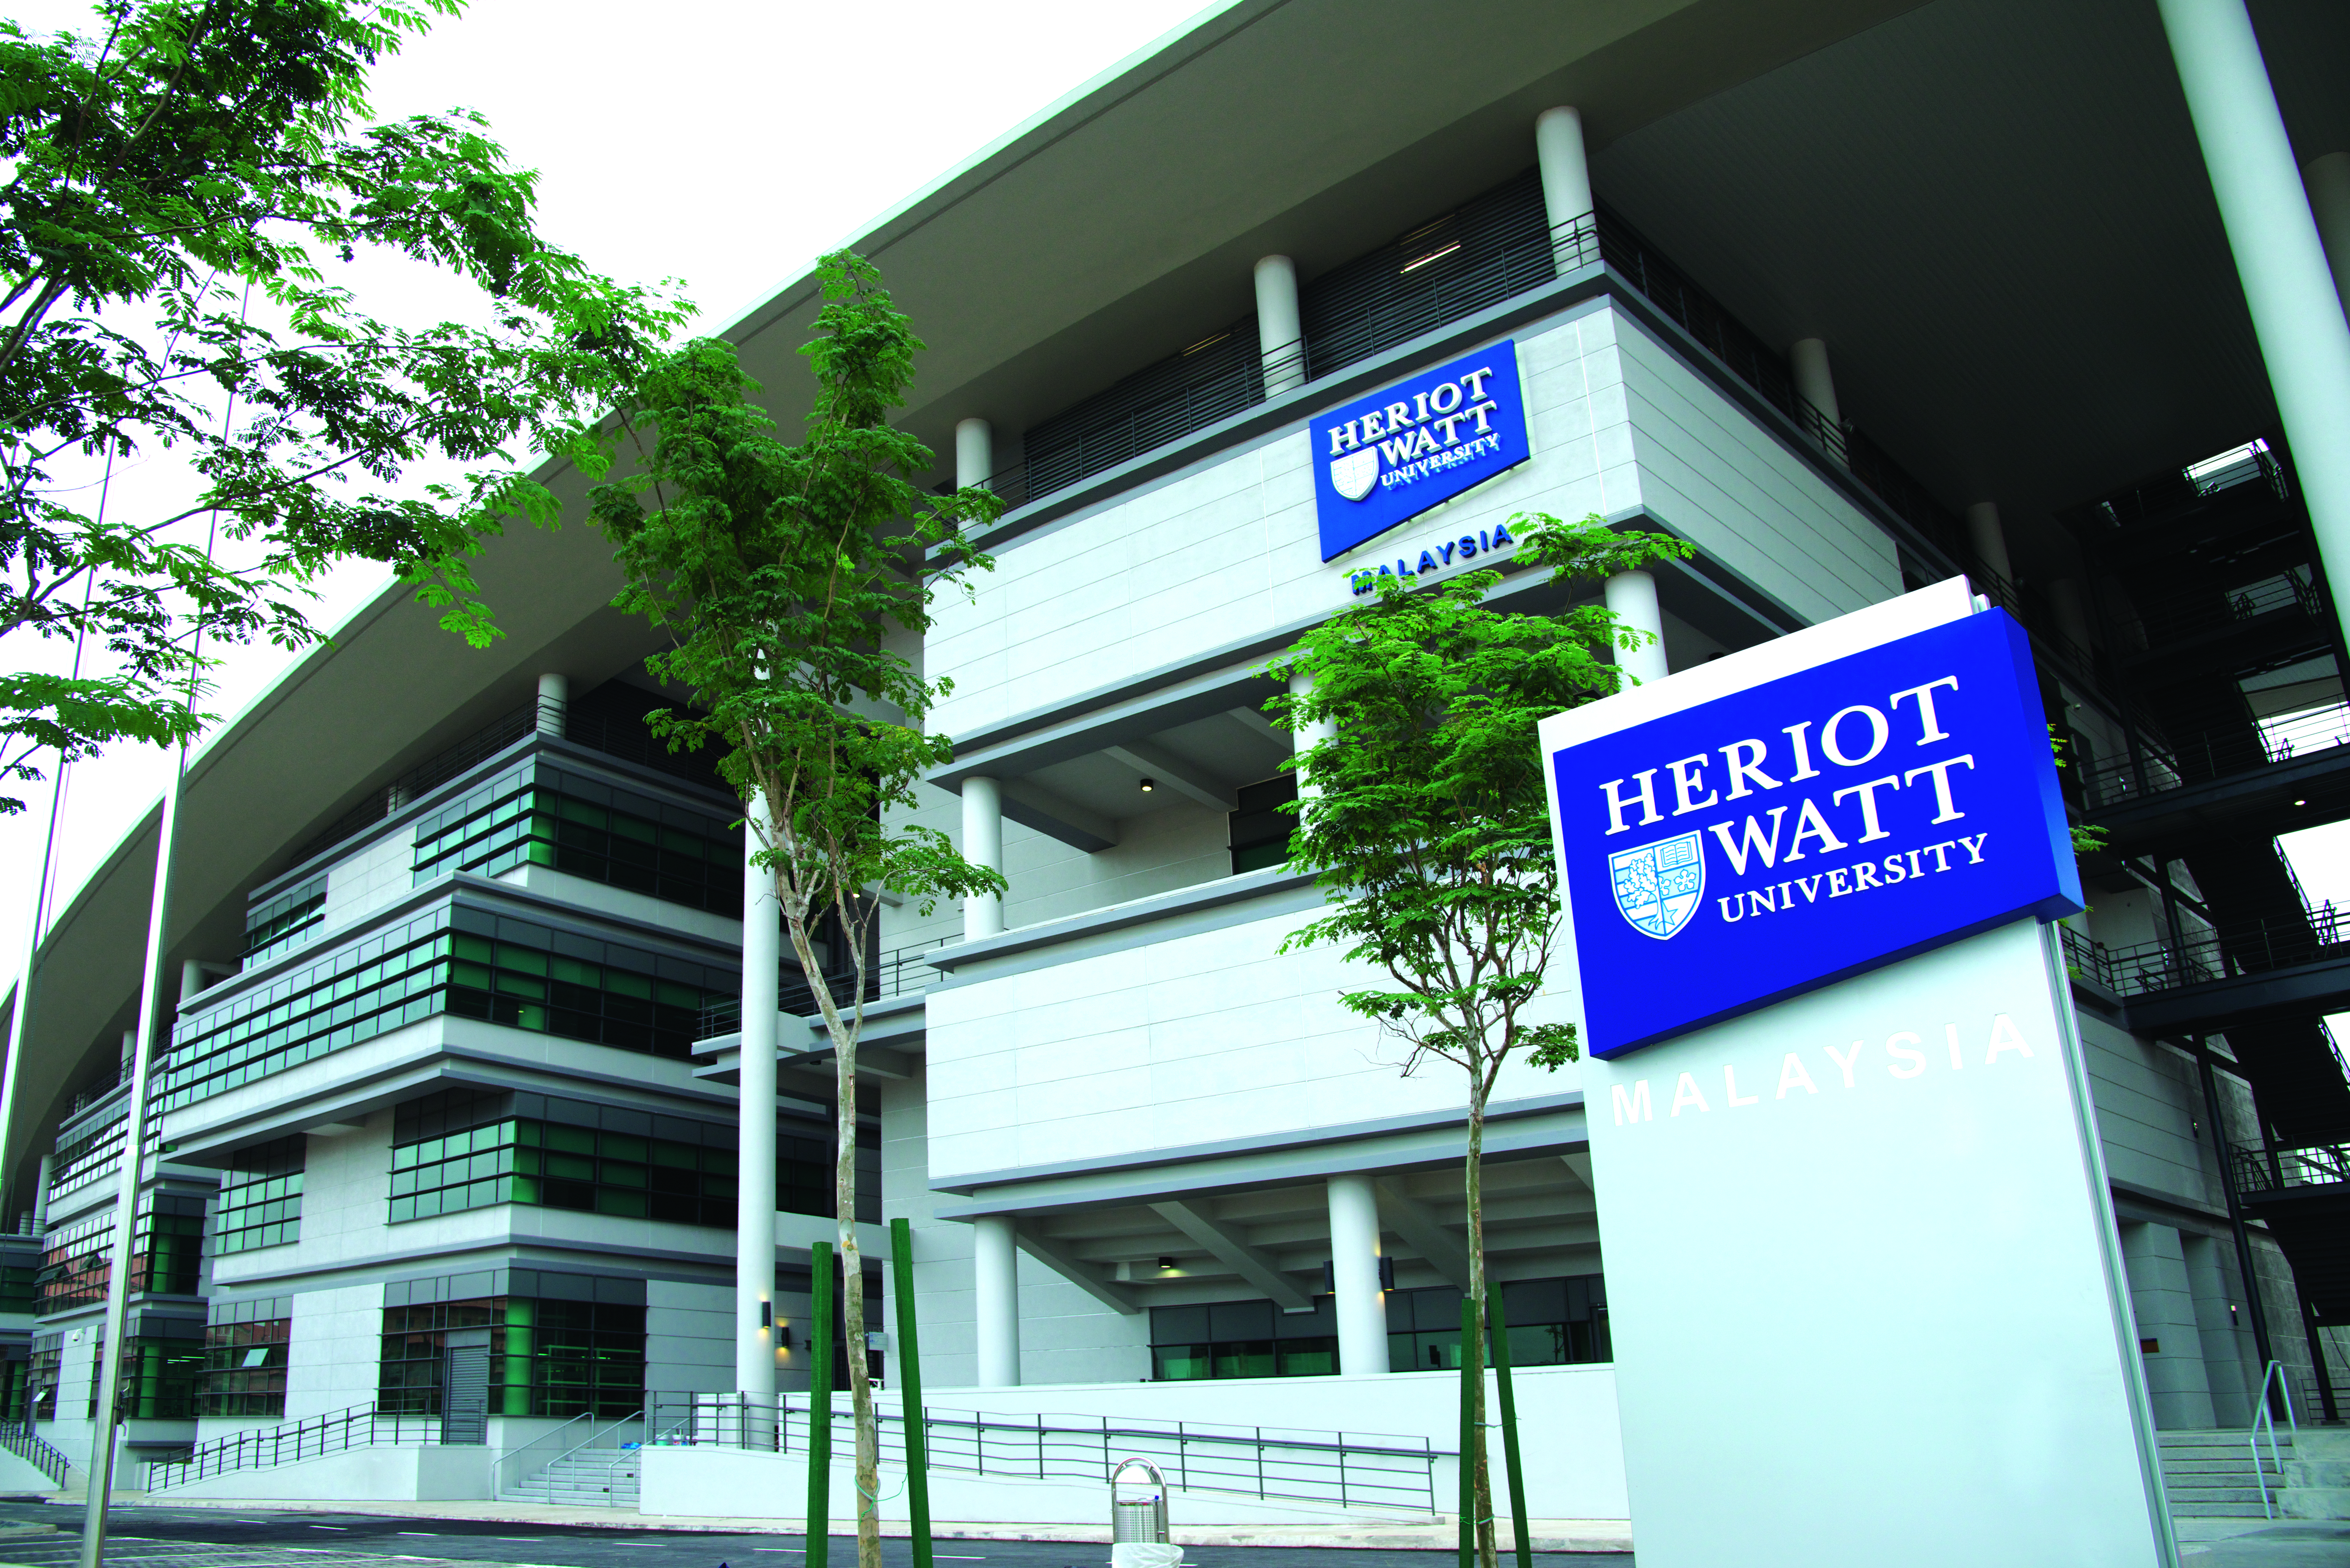 Heriot-Watt University Malaysia is a top ranking UK university for Chemical Engineering